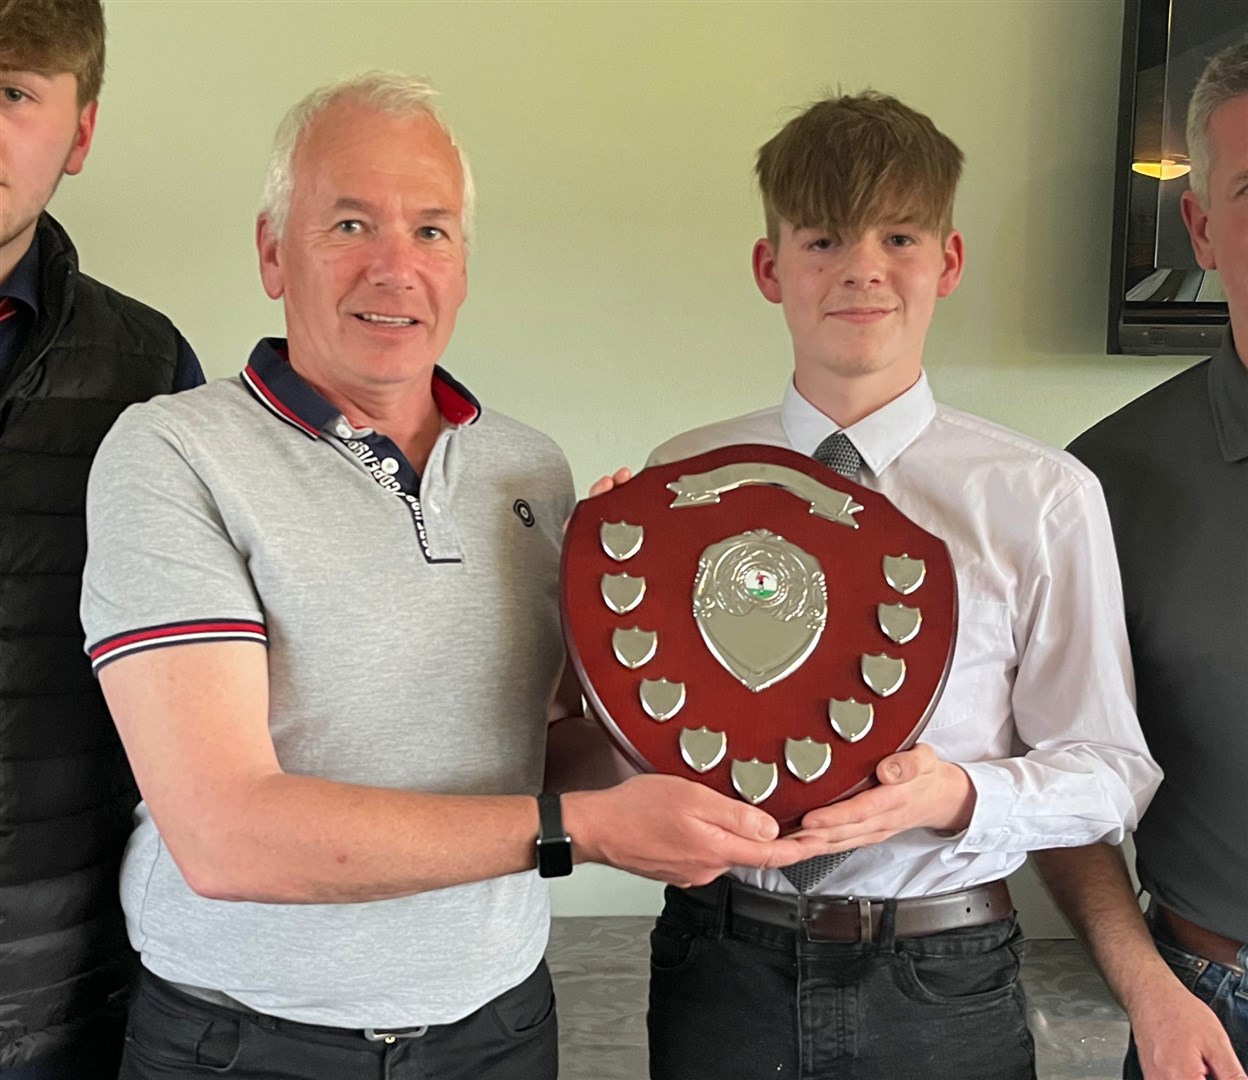 The Tain and Easter Ross Rotary Club Shield was presented to most improved player Billy Knox, by Rotary member William Cowie.